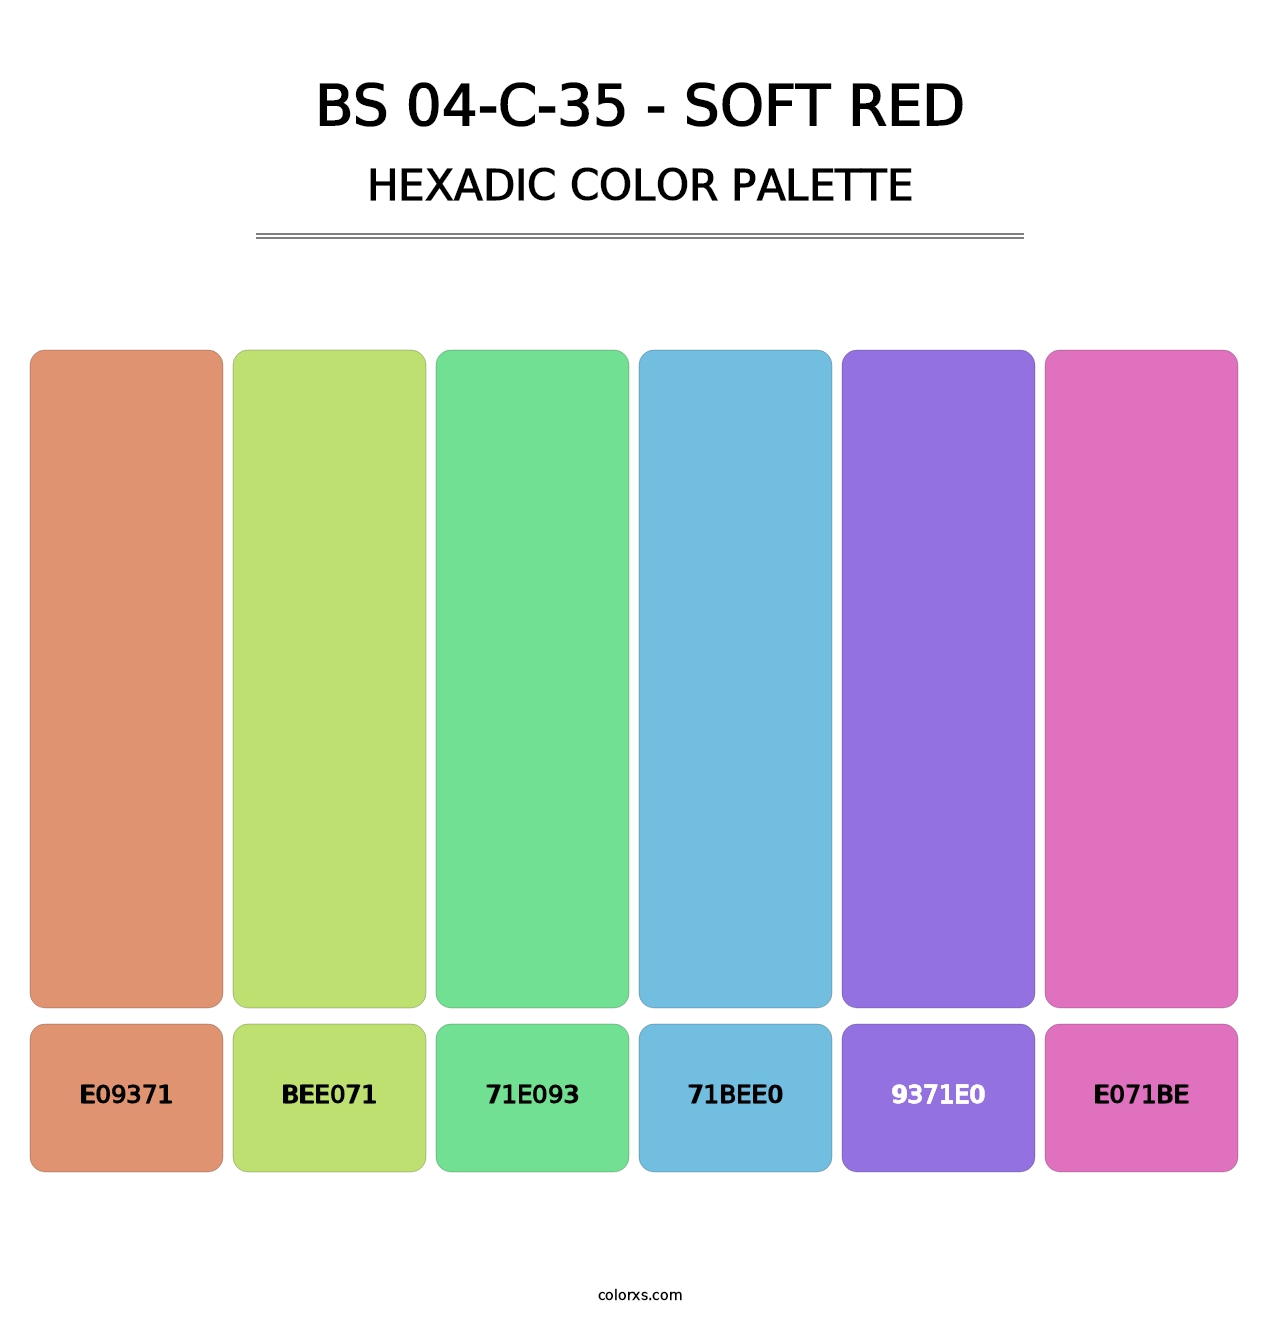 BS 04-C-35 - Soft Red - Hexadic Color Palette